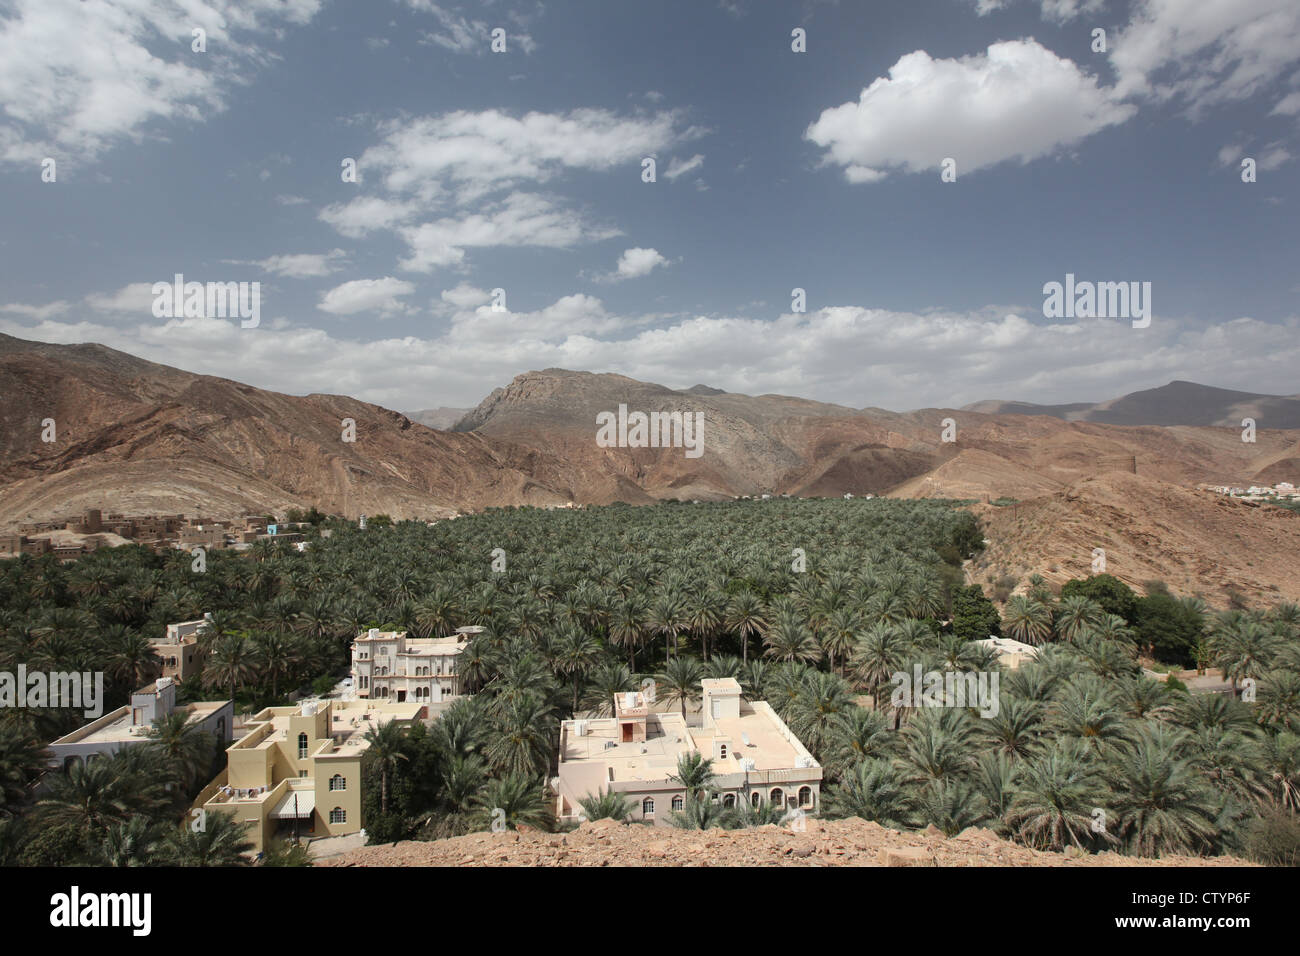 Landscape in Oman, Middle East Stock Photo